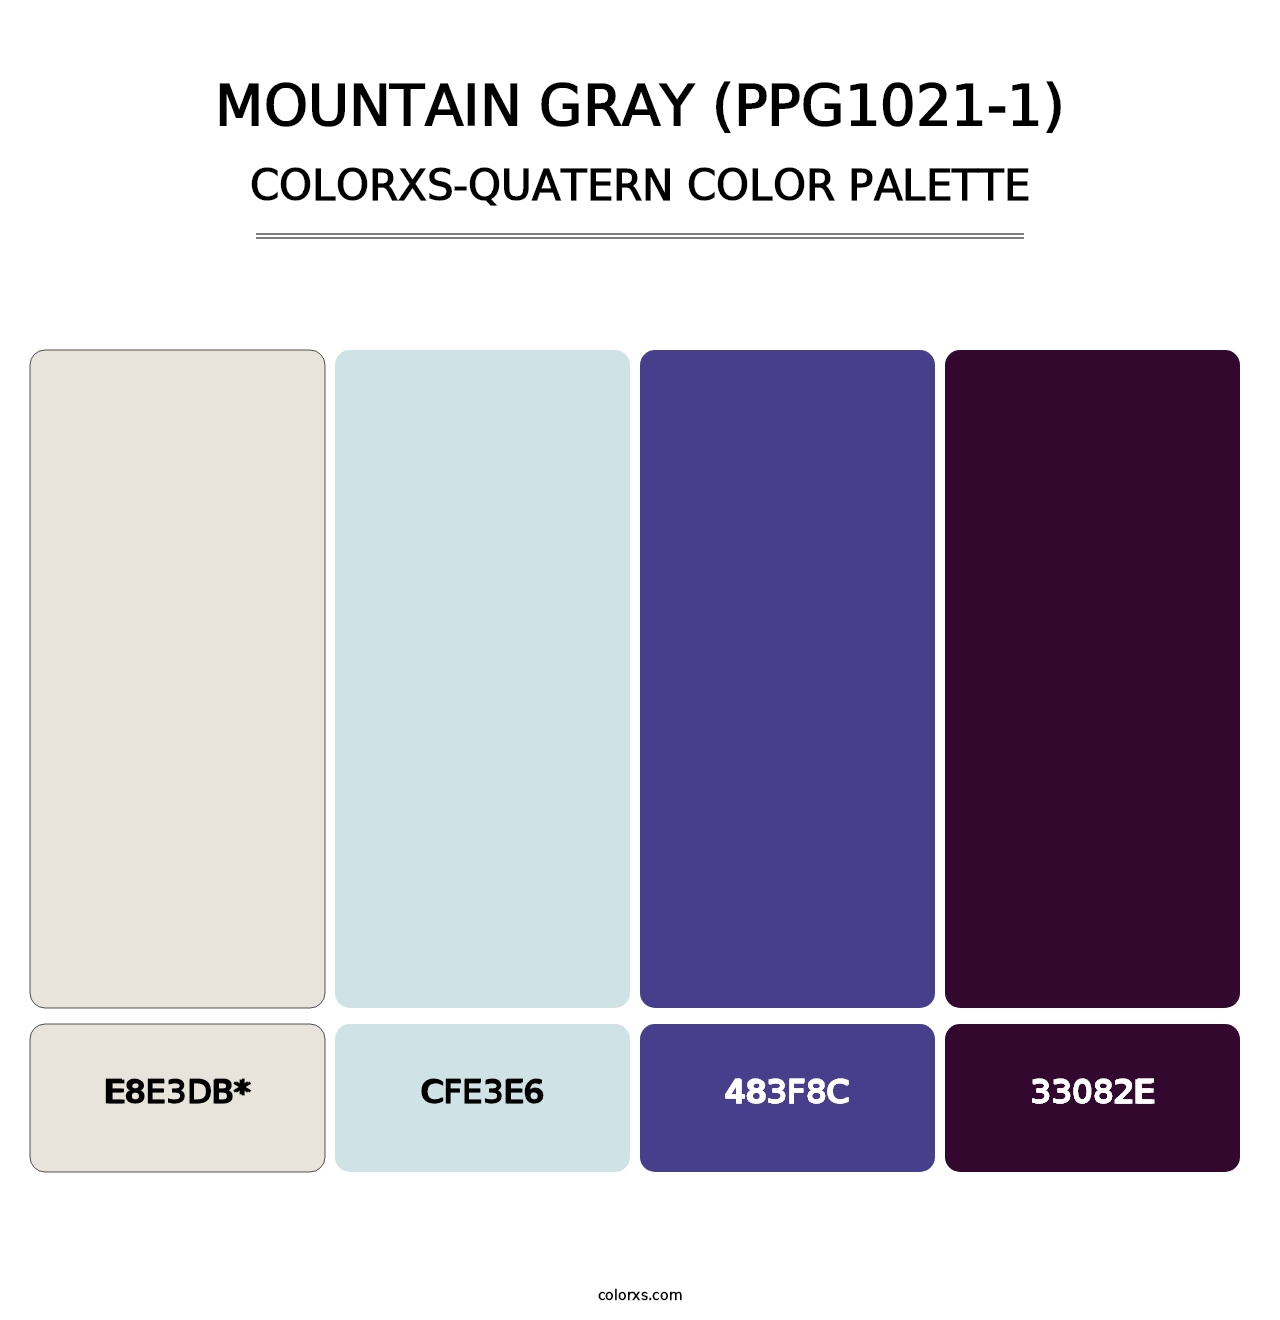 Mountain Gray (PPG1021-1) - Colorxs Quatern Palette